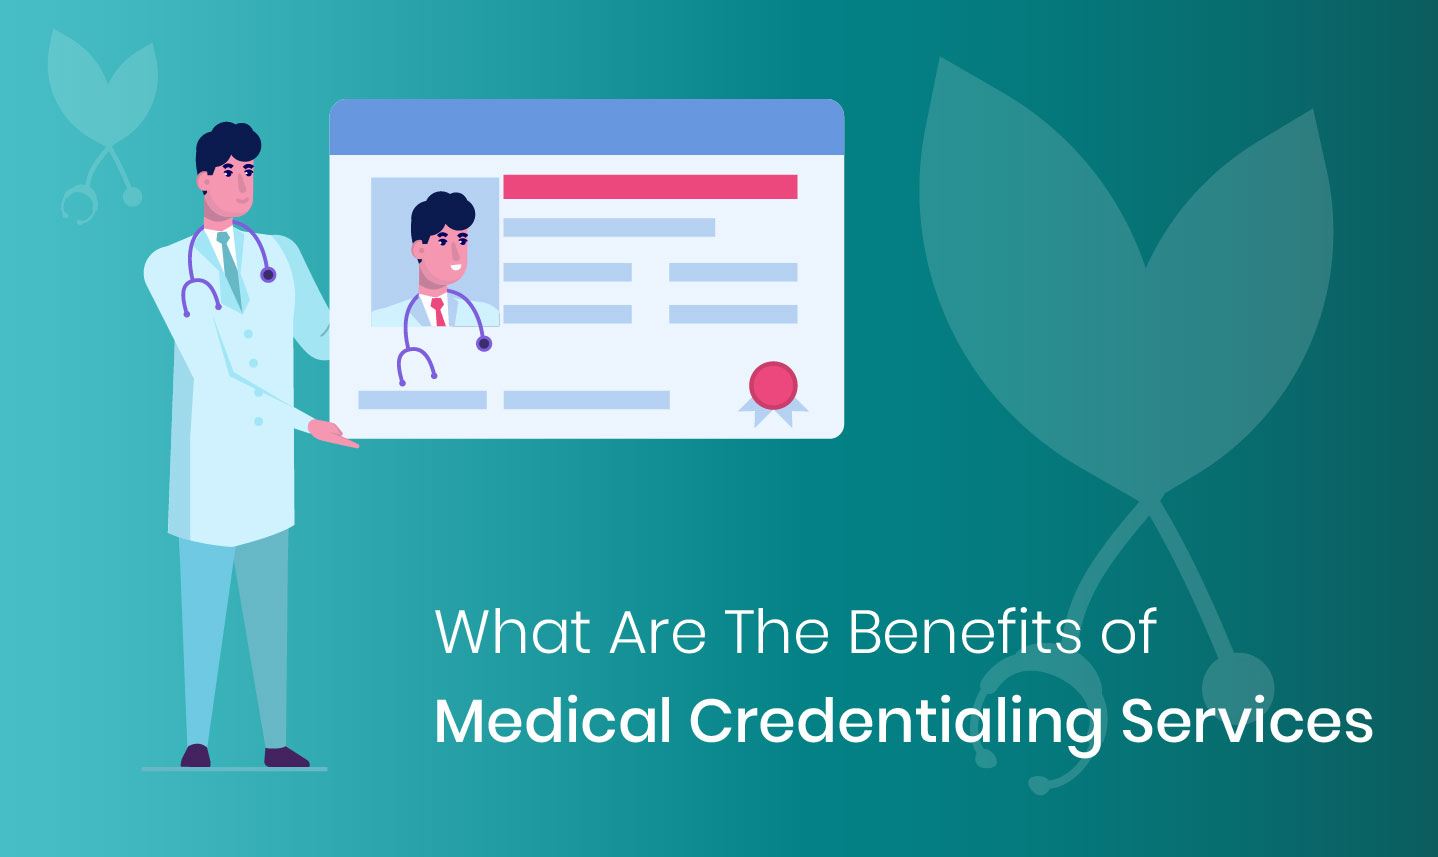 What Are The Benefits of Medical Credentialing Services